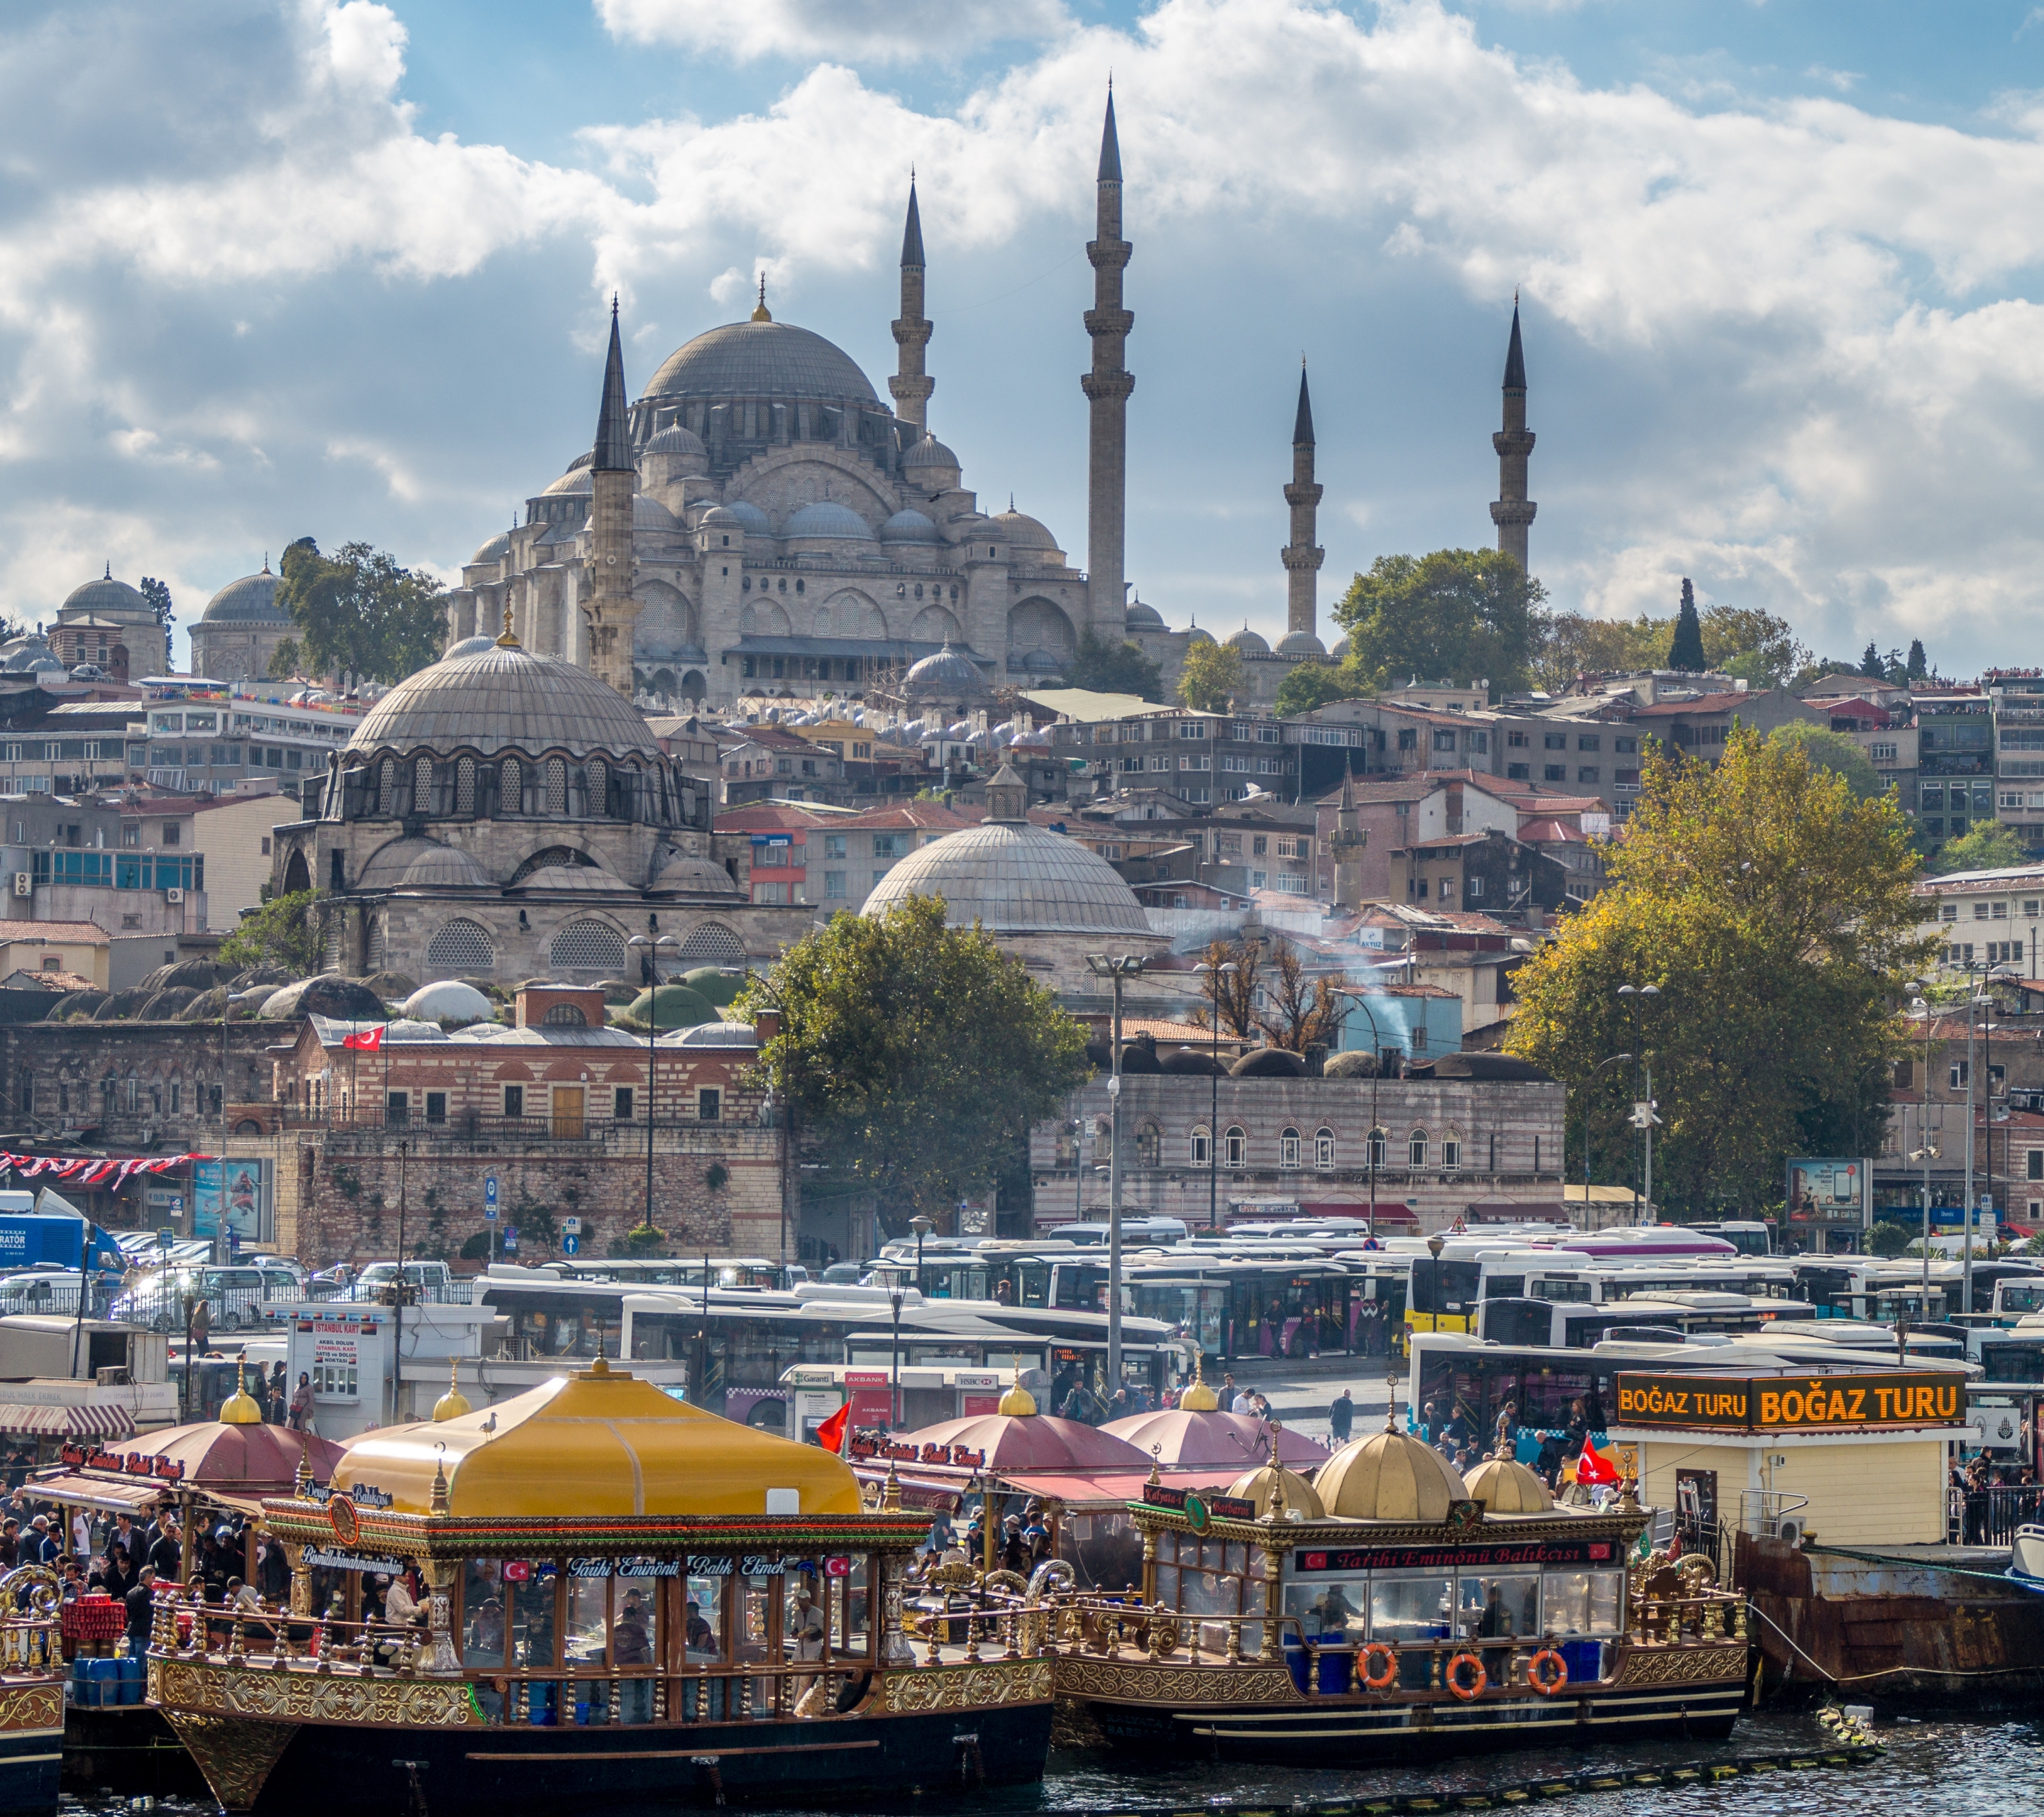 turkey, religious, suleymaniye mosque, boat, cityscape, istanbul, mosque, mosques